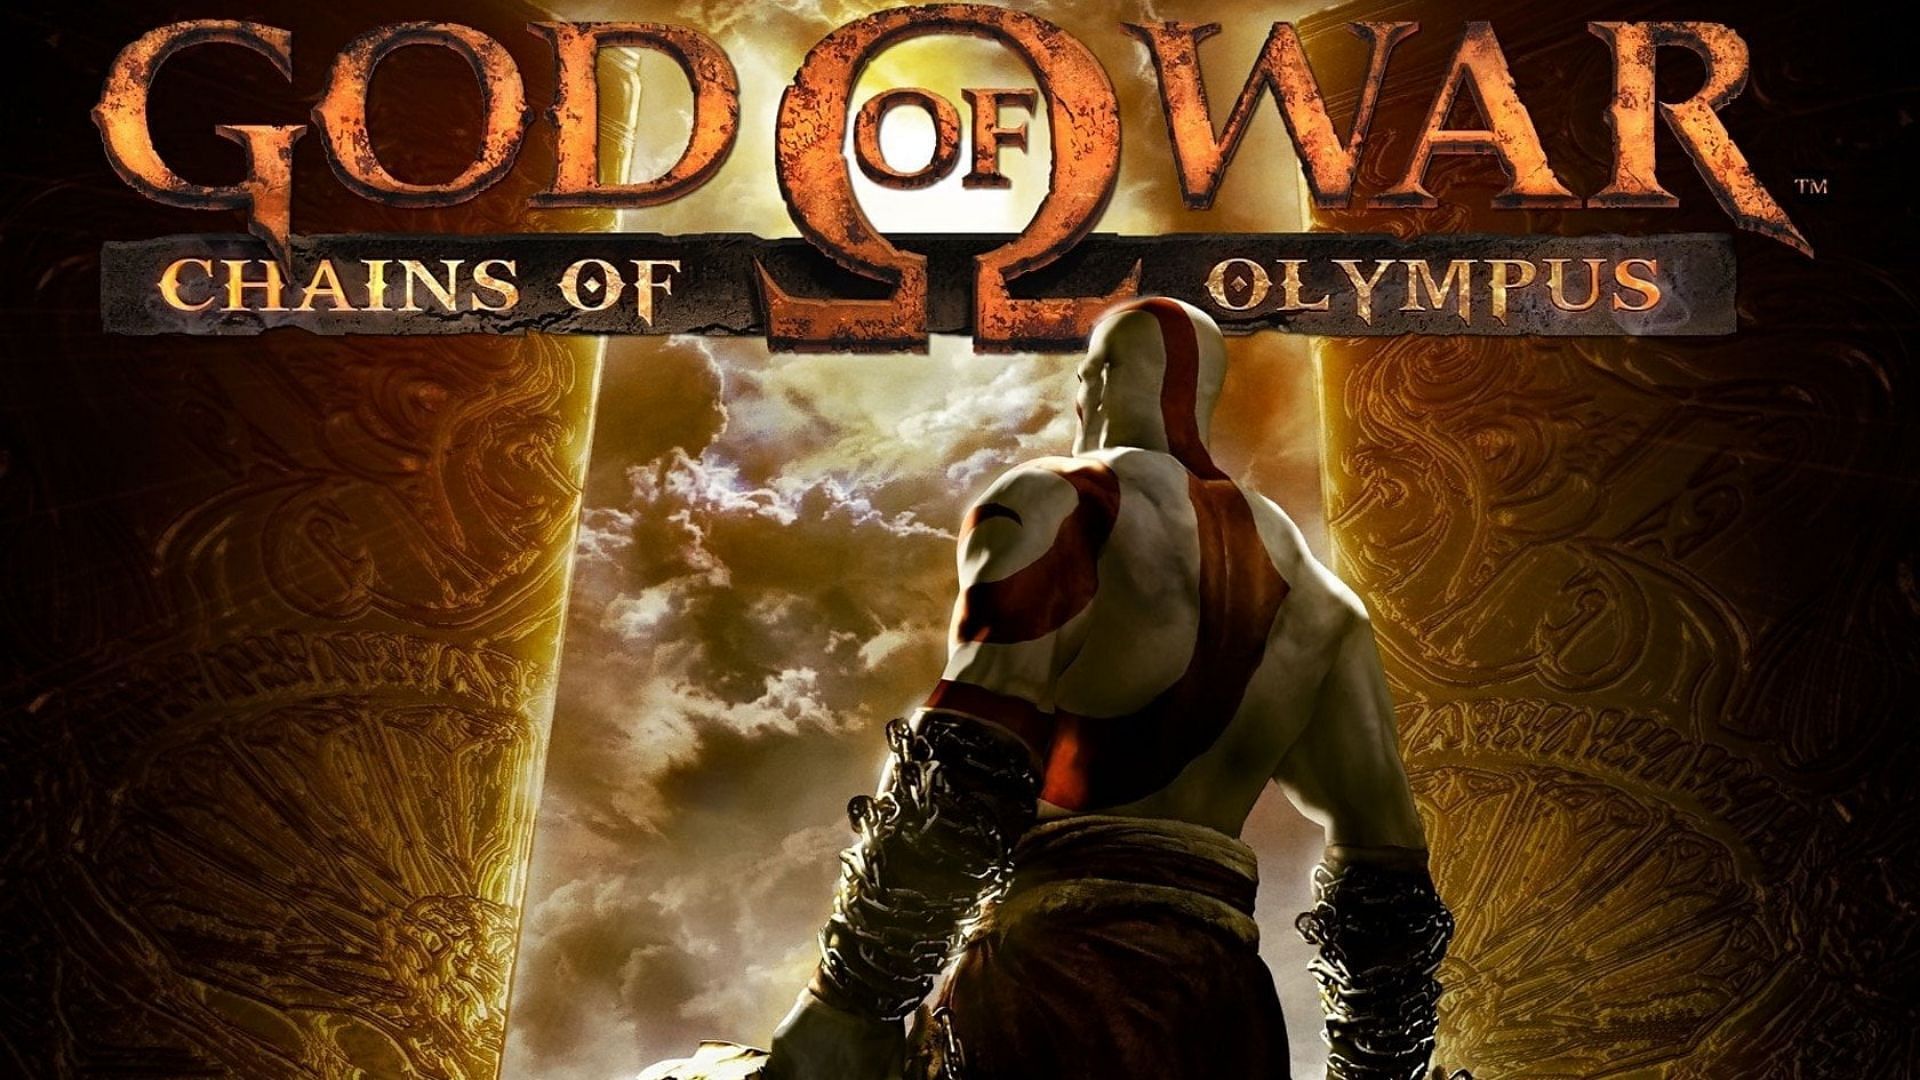 God of War Chains of Olympus promotional image